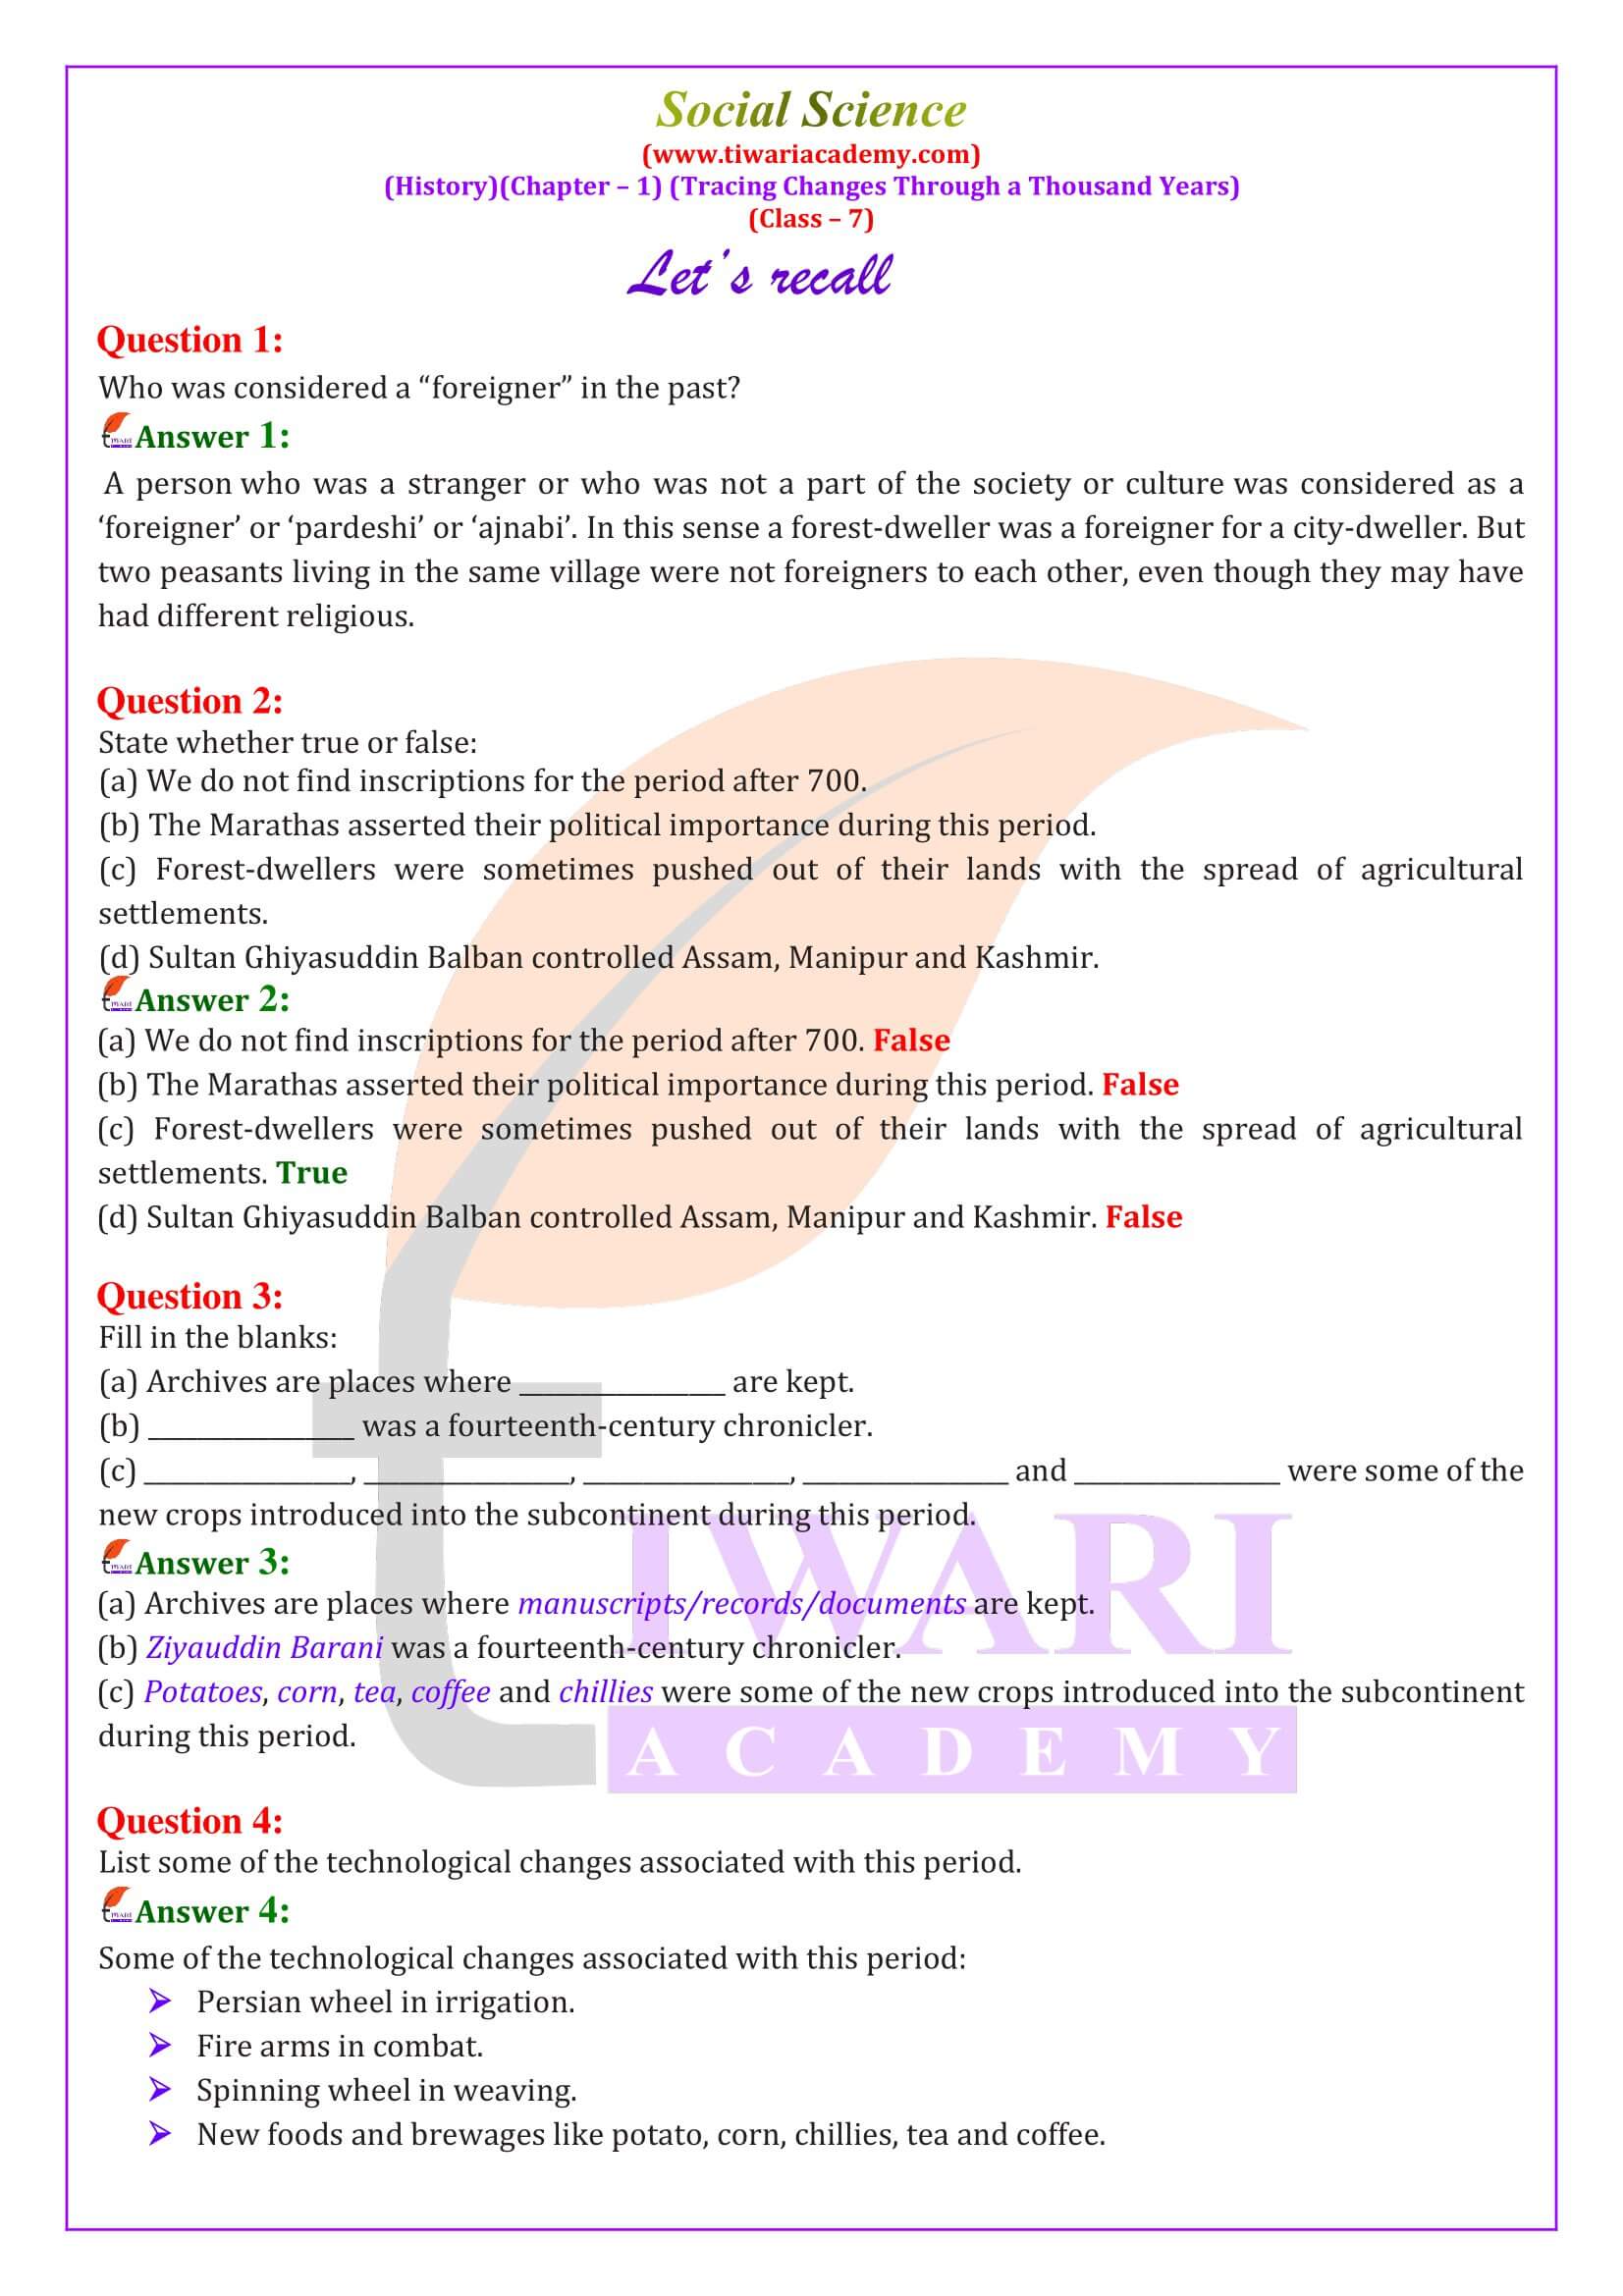 NCERT Solutions for Class 7 Social Science History Chapter 1 in English Medium